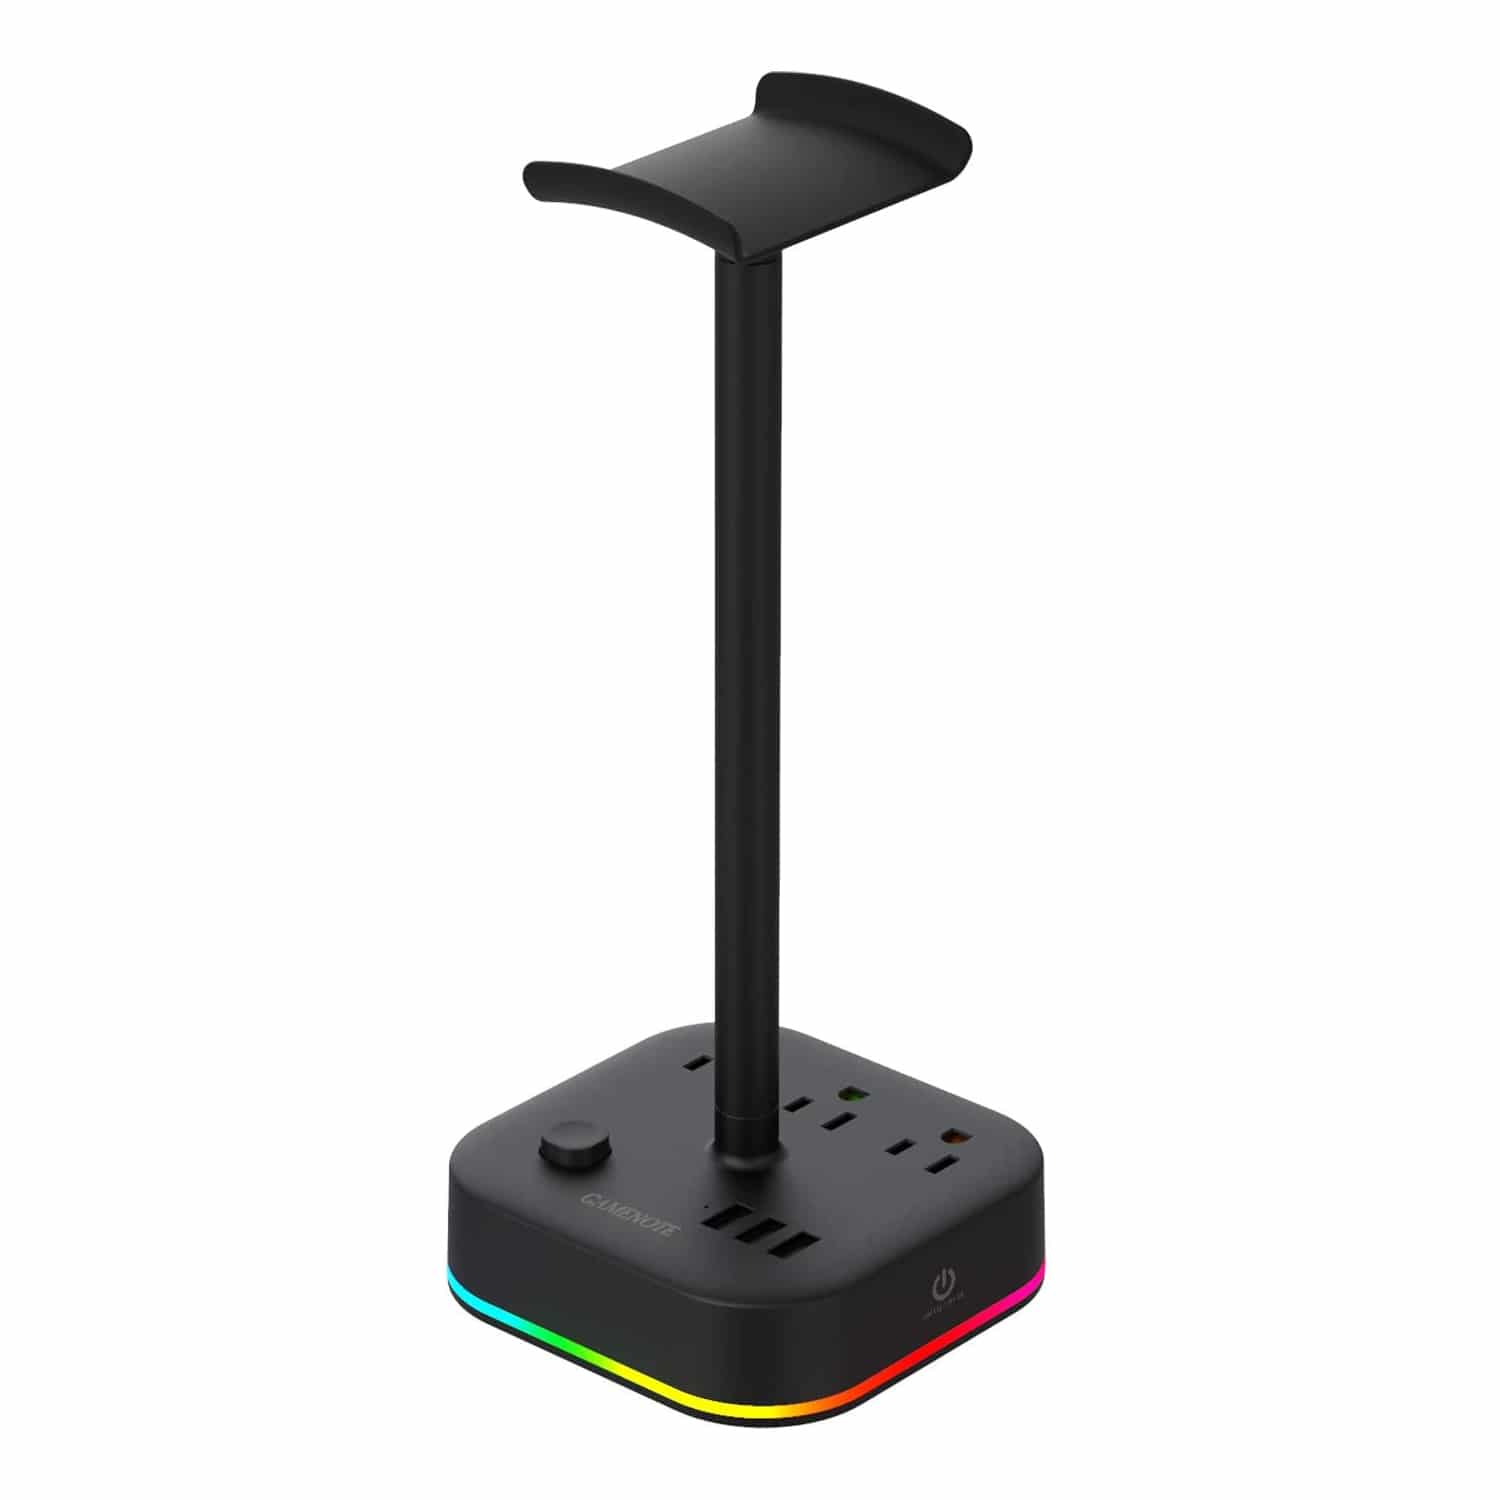 HAVIT DPM05 RGB Headset Stand with 3 USB Charging Ports & 3 Power Outlets